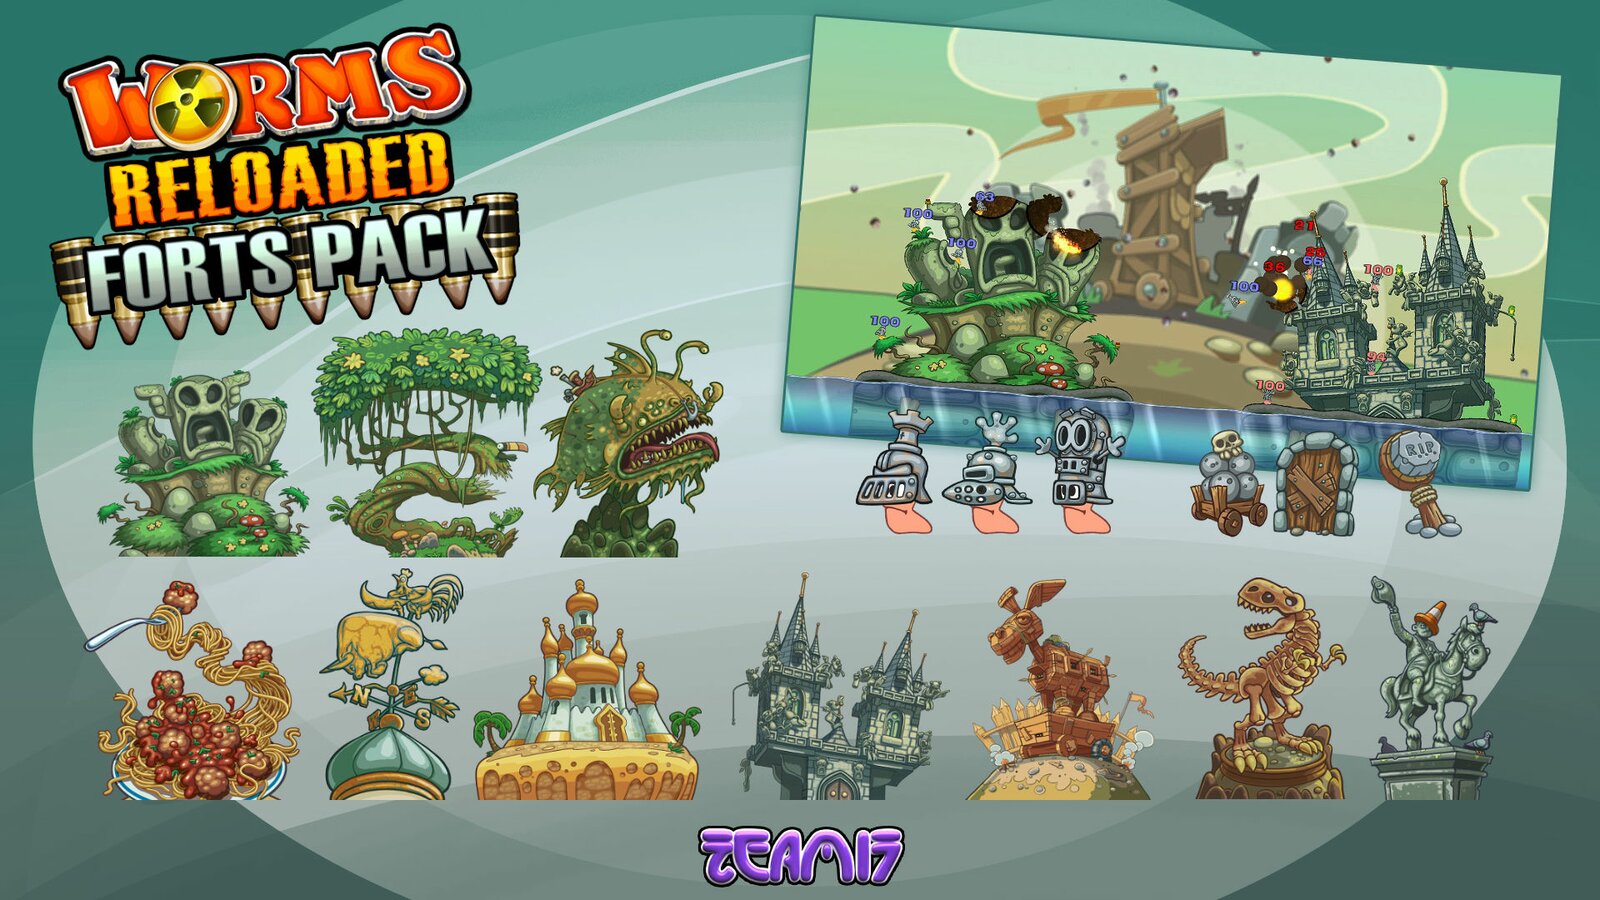 Worms Reloaded - Fort Pack